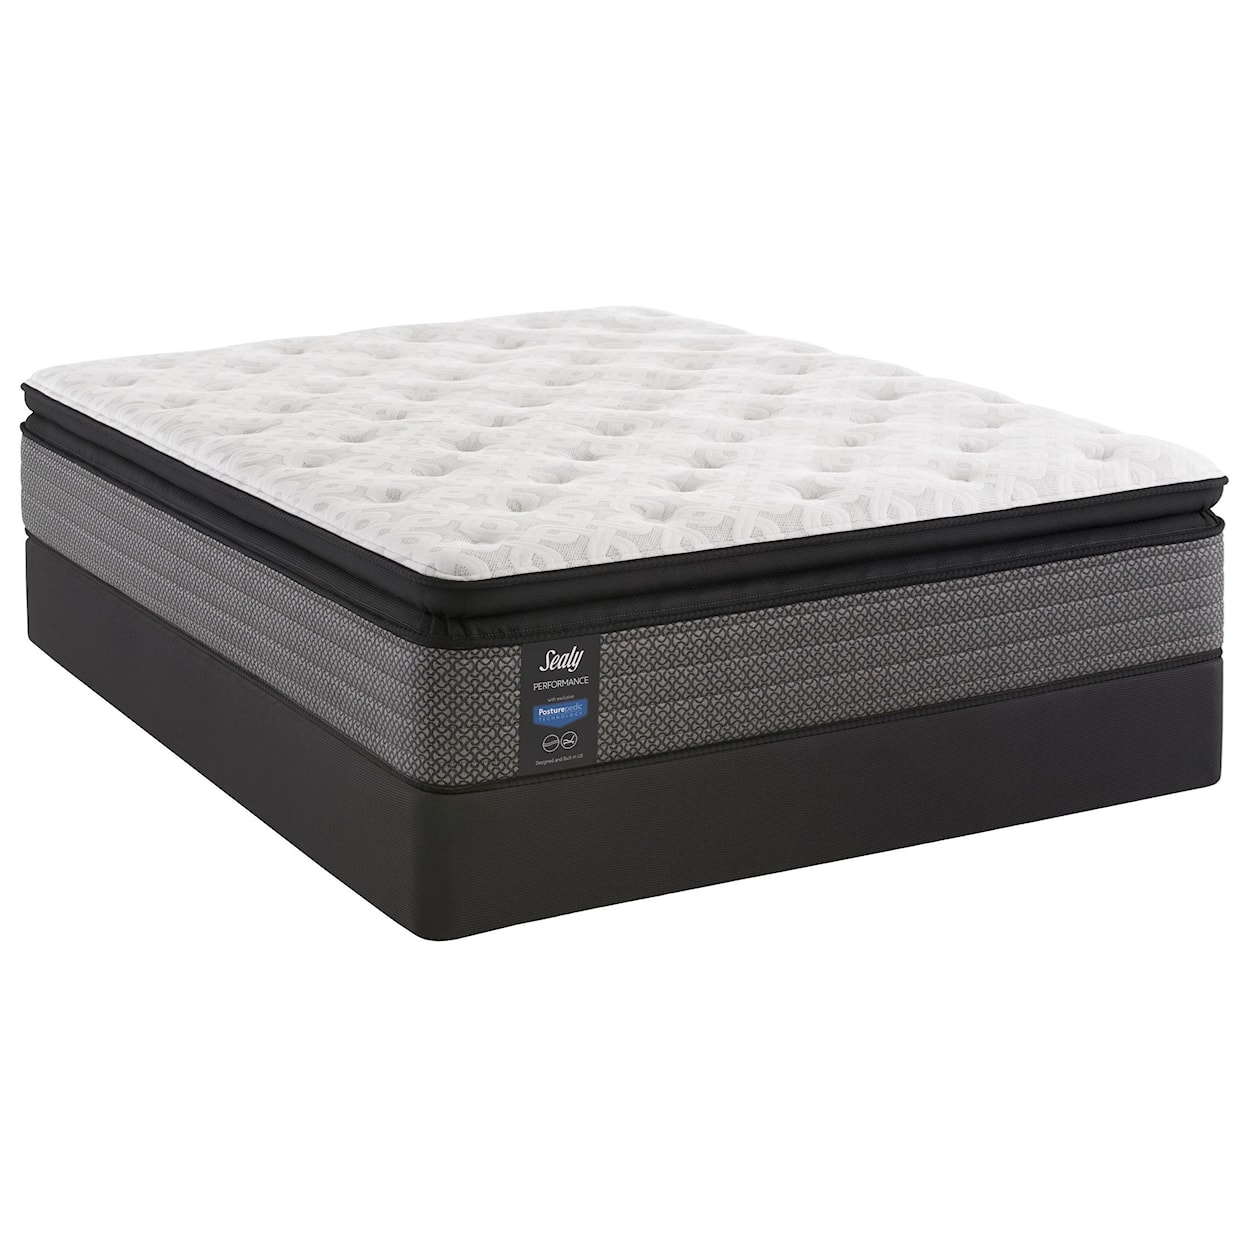 Sealy Energetic Cushion Firm Queen 13 1/2" CF EPT Mattress Set